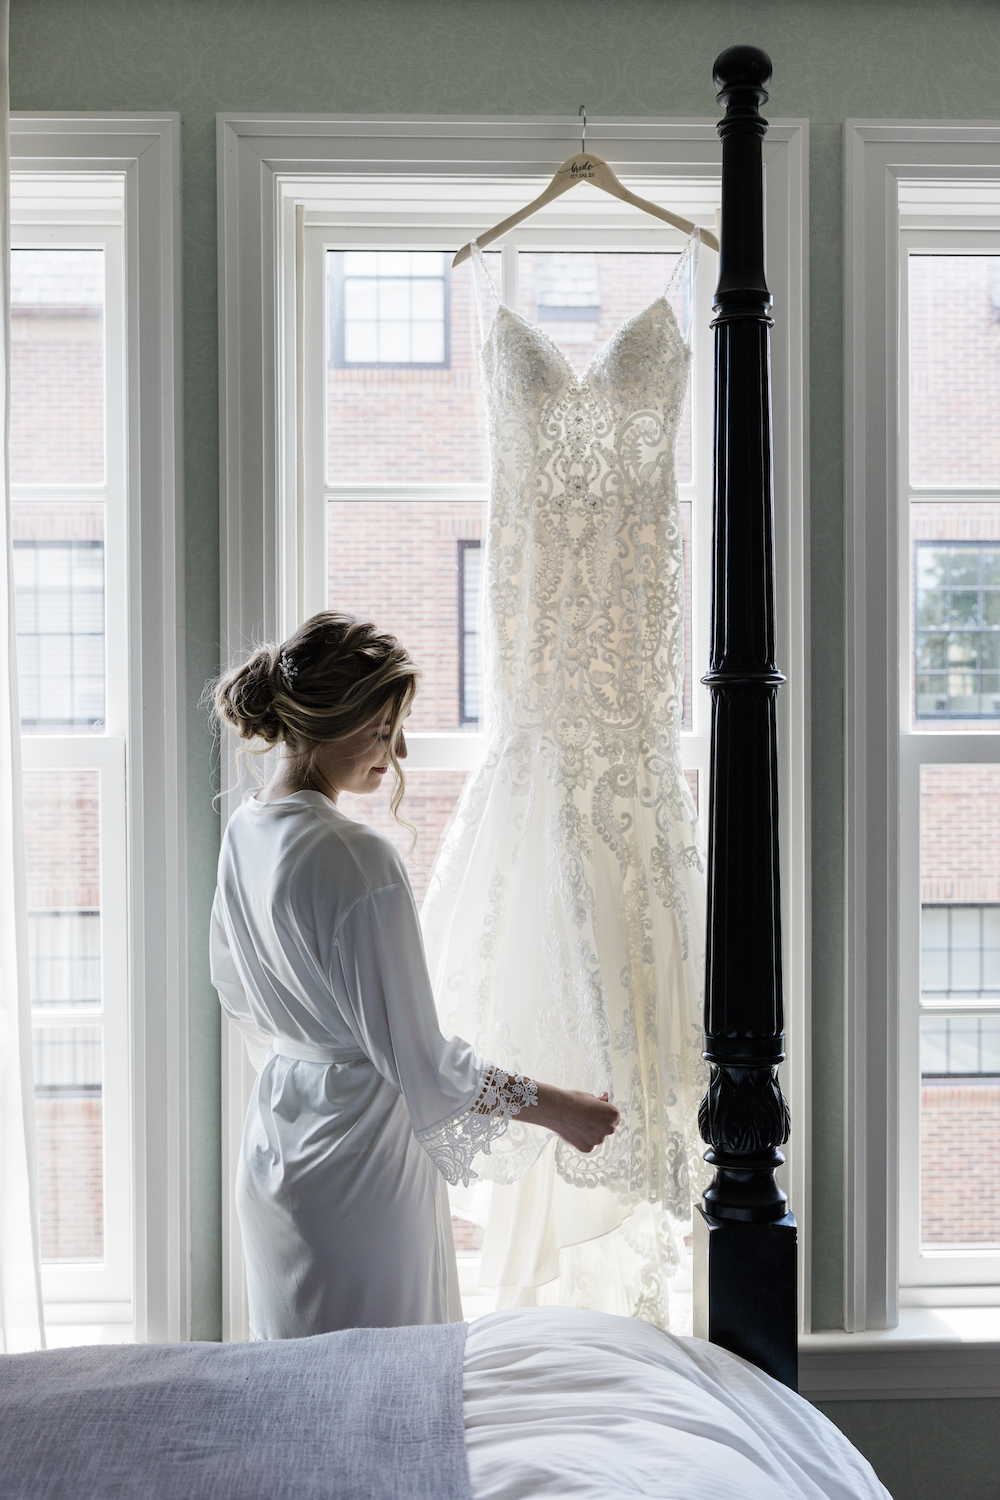 Bride in her robe touching the fabric of her wedding dress hung from the window of her suite, captured by Holly Green Photography